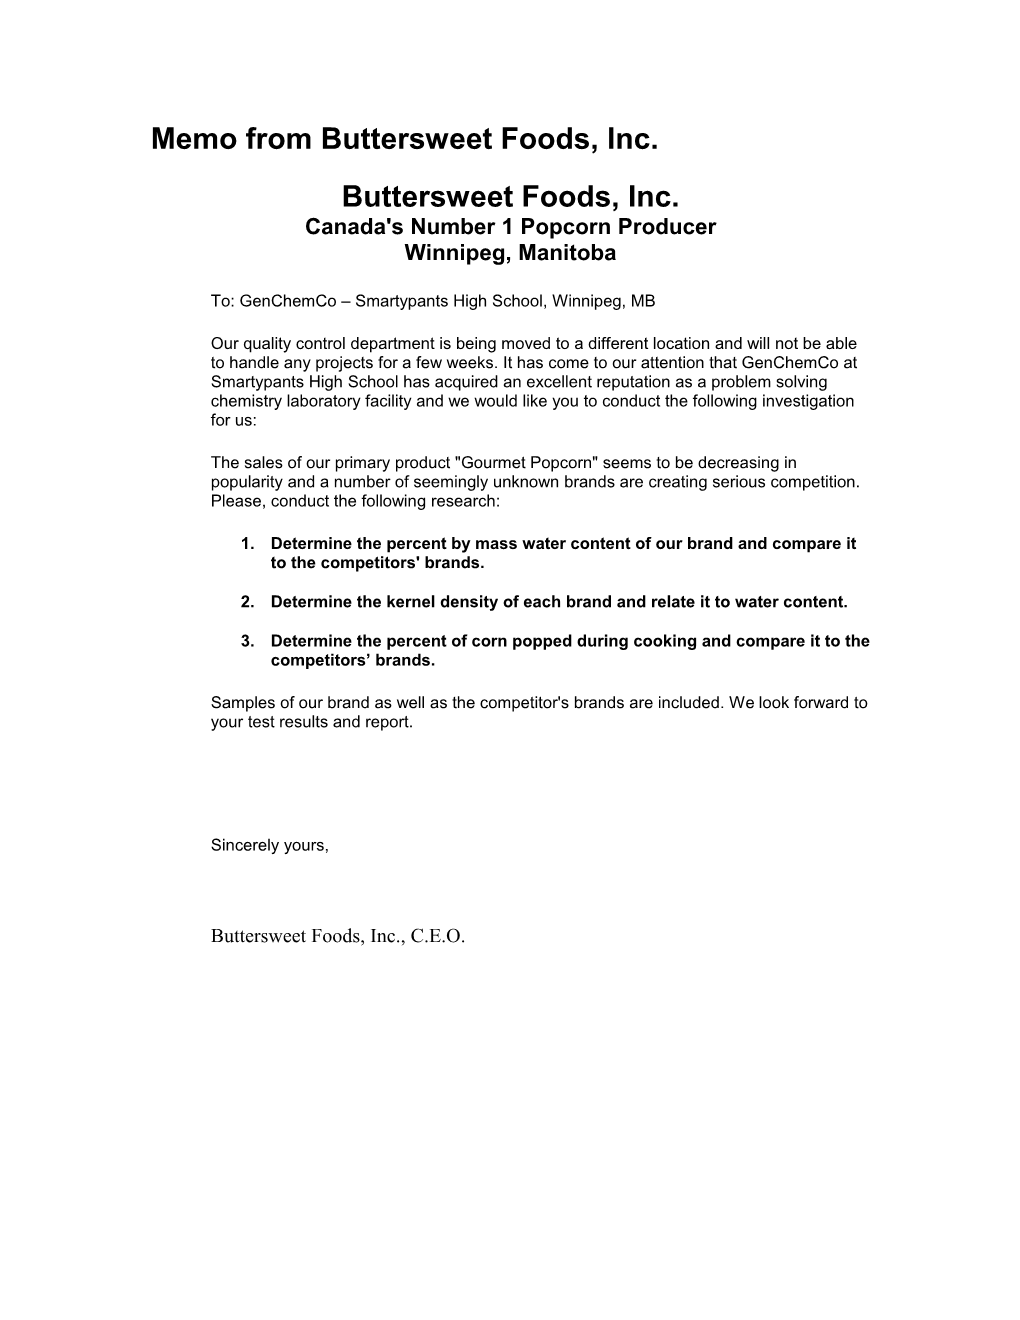 Memo from Buttersweet Foods, Inc